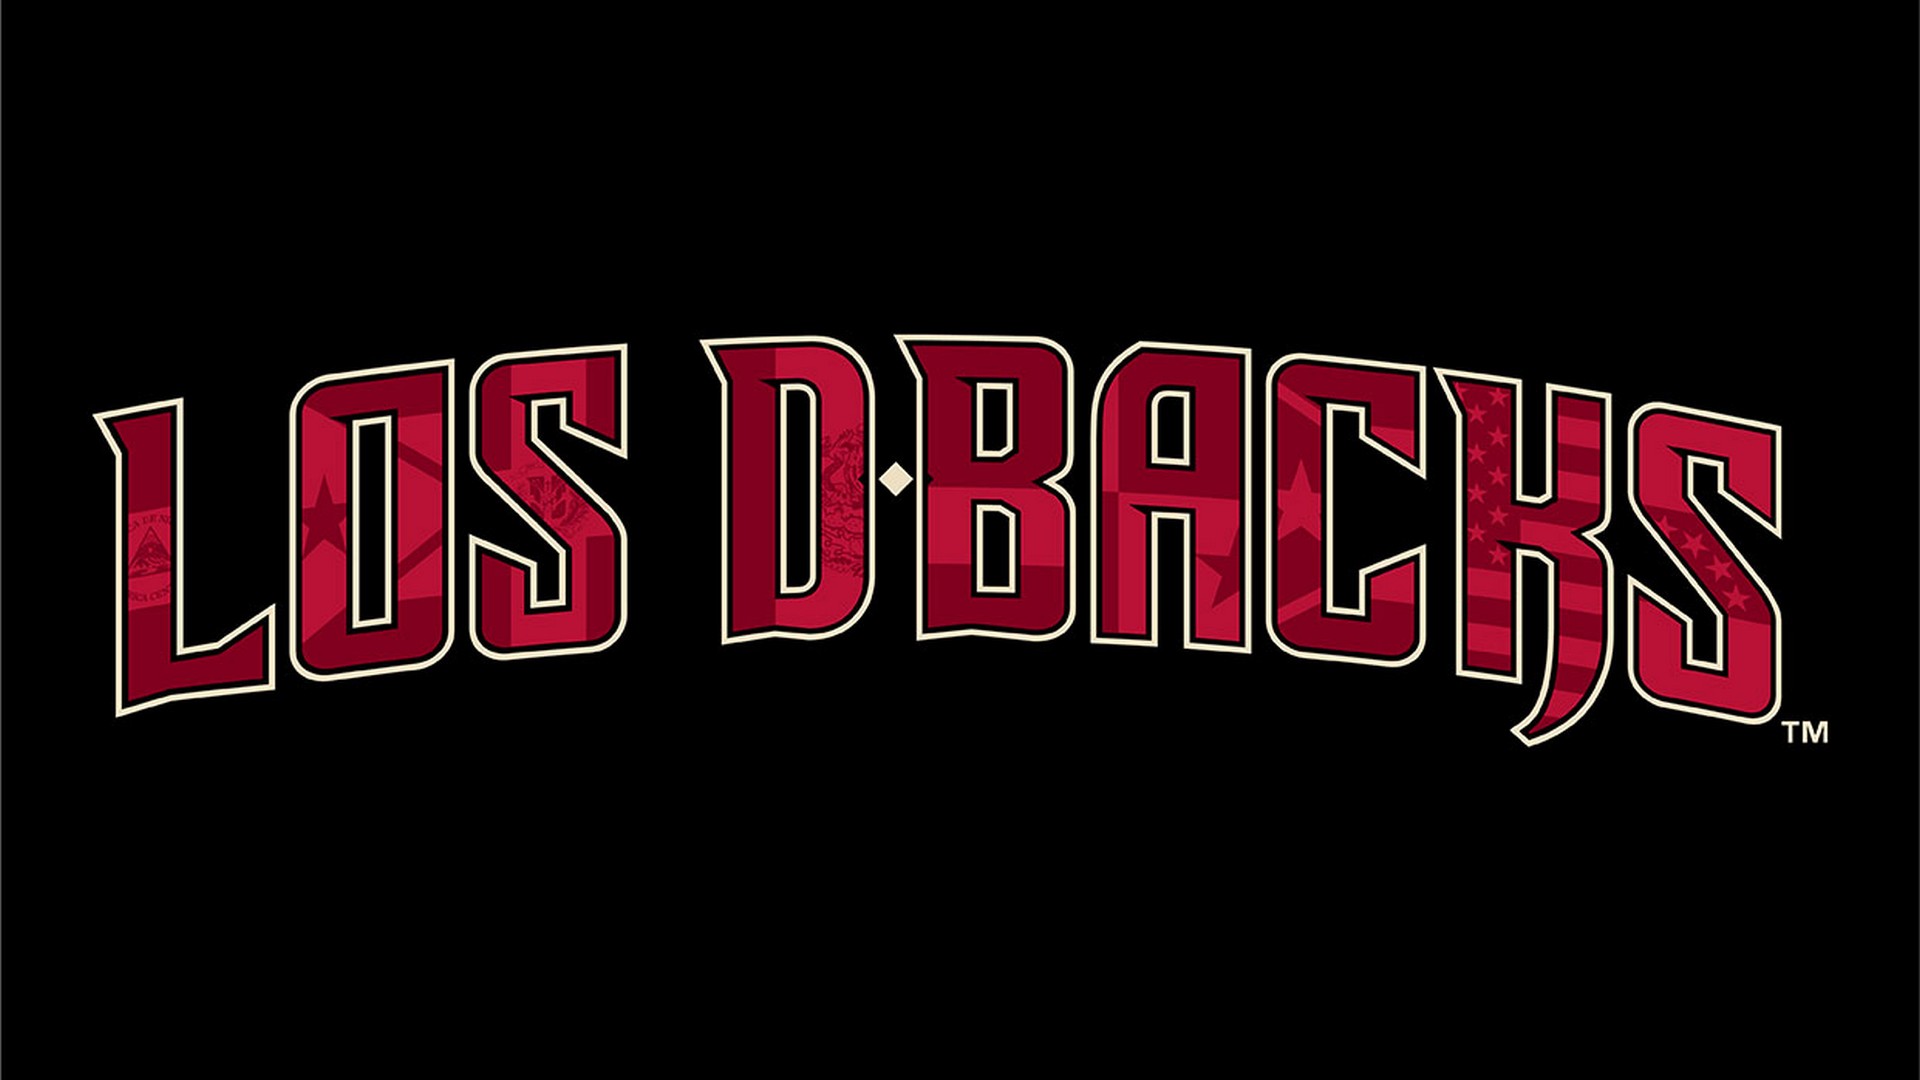 HD Desktop Wallpaper Arizona Diamondbacks MLB With high-resolution 1920X1080 pixel. You can use this wallpaper for Mac Desktop Wallpaper, Laptop Screensavers, Android Wallpapers, Tablet or iPhone Home Screen and another mobile phone device